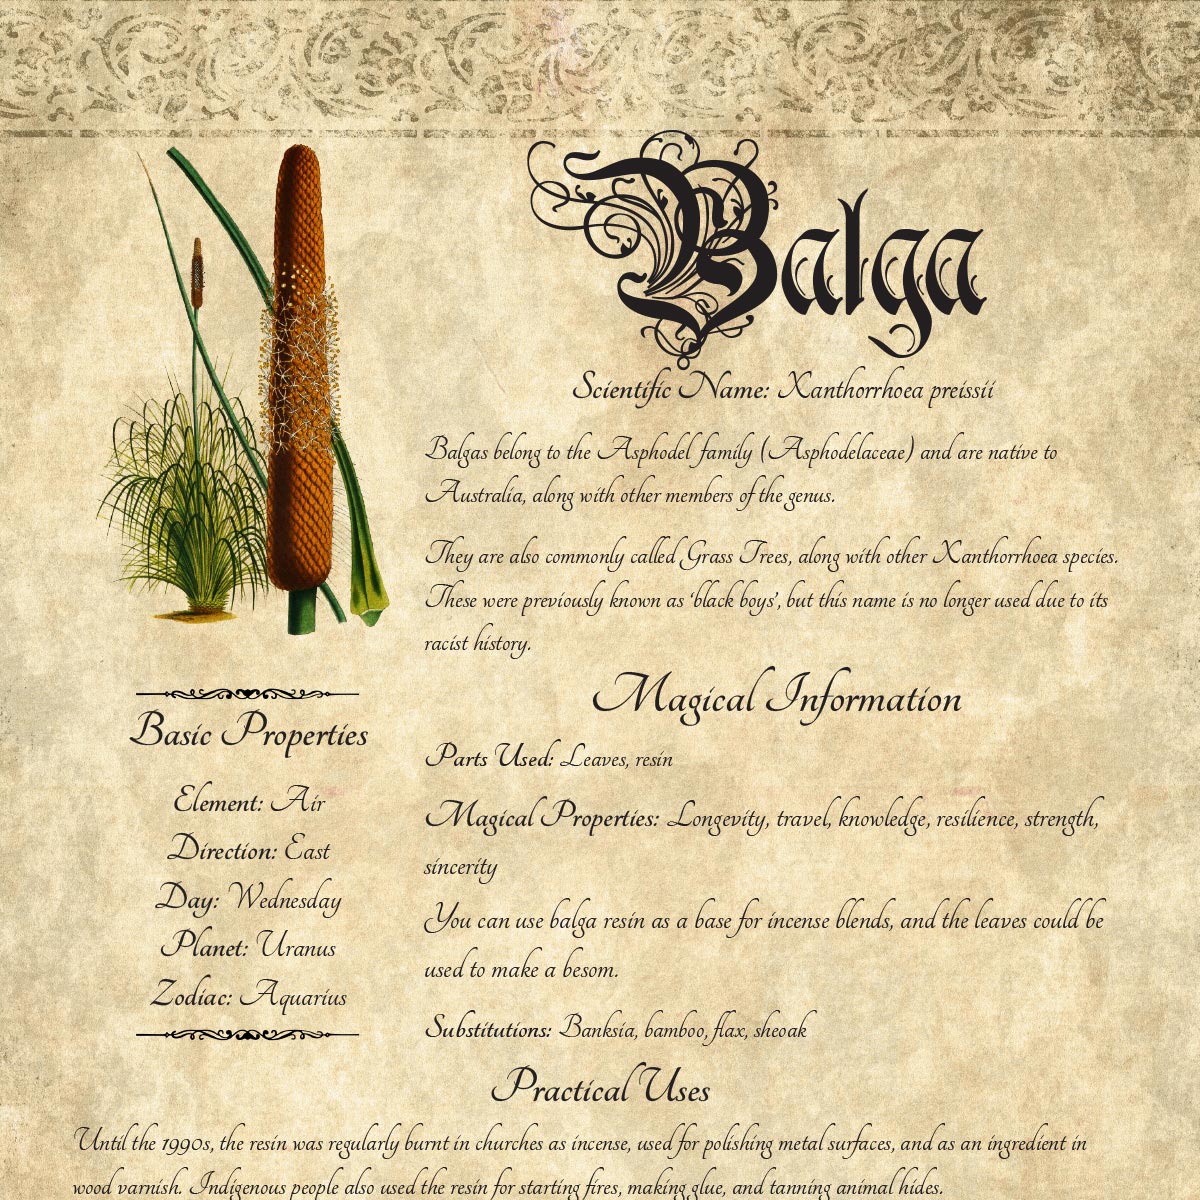 Antique-style grimoire page on the properties of Balga, with an aged paper background and script font